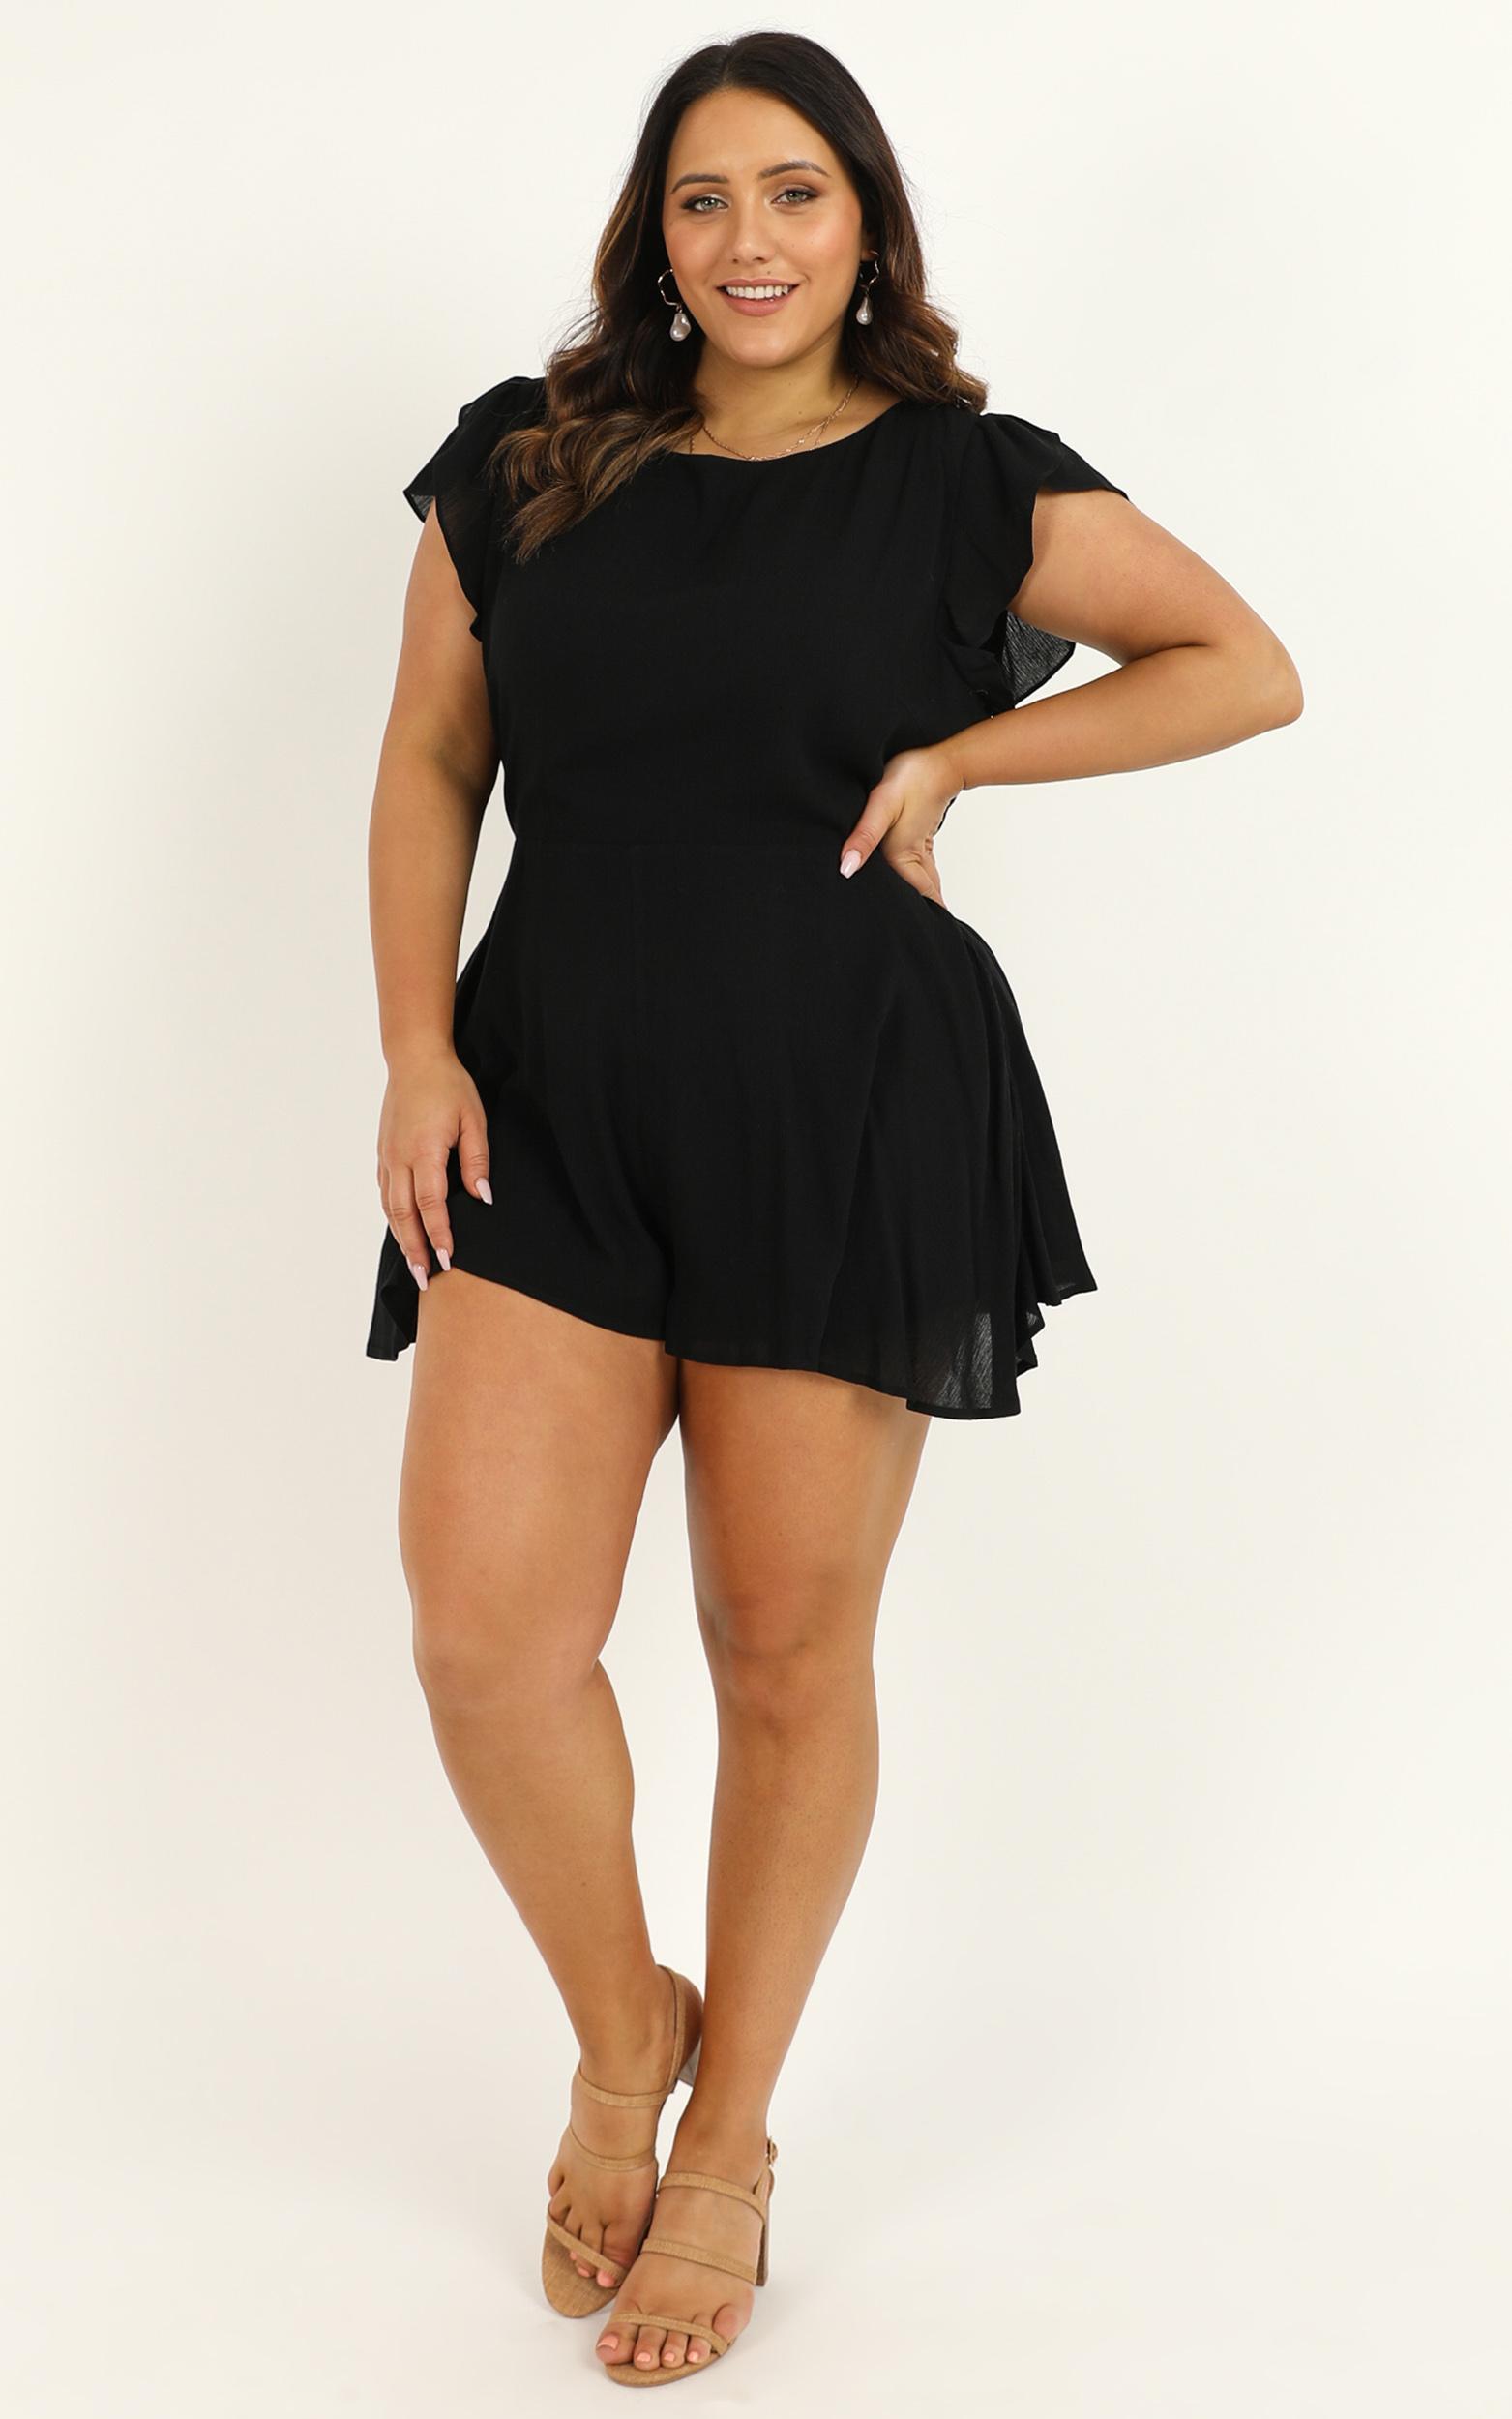 Fortunate Love Playsuit in black - 20 (XXXXL), Black, hi-res image number null